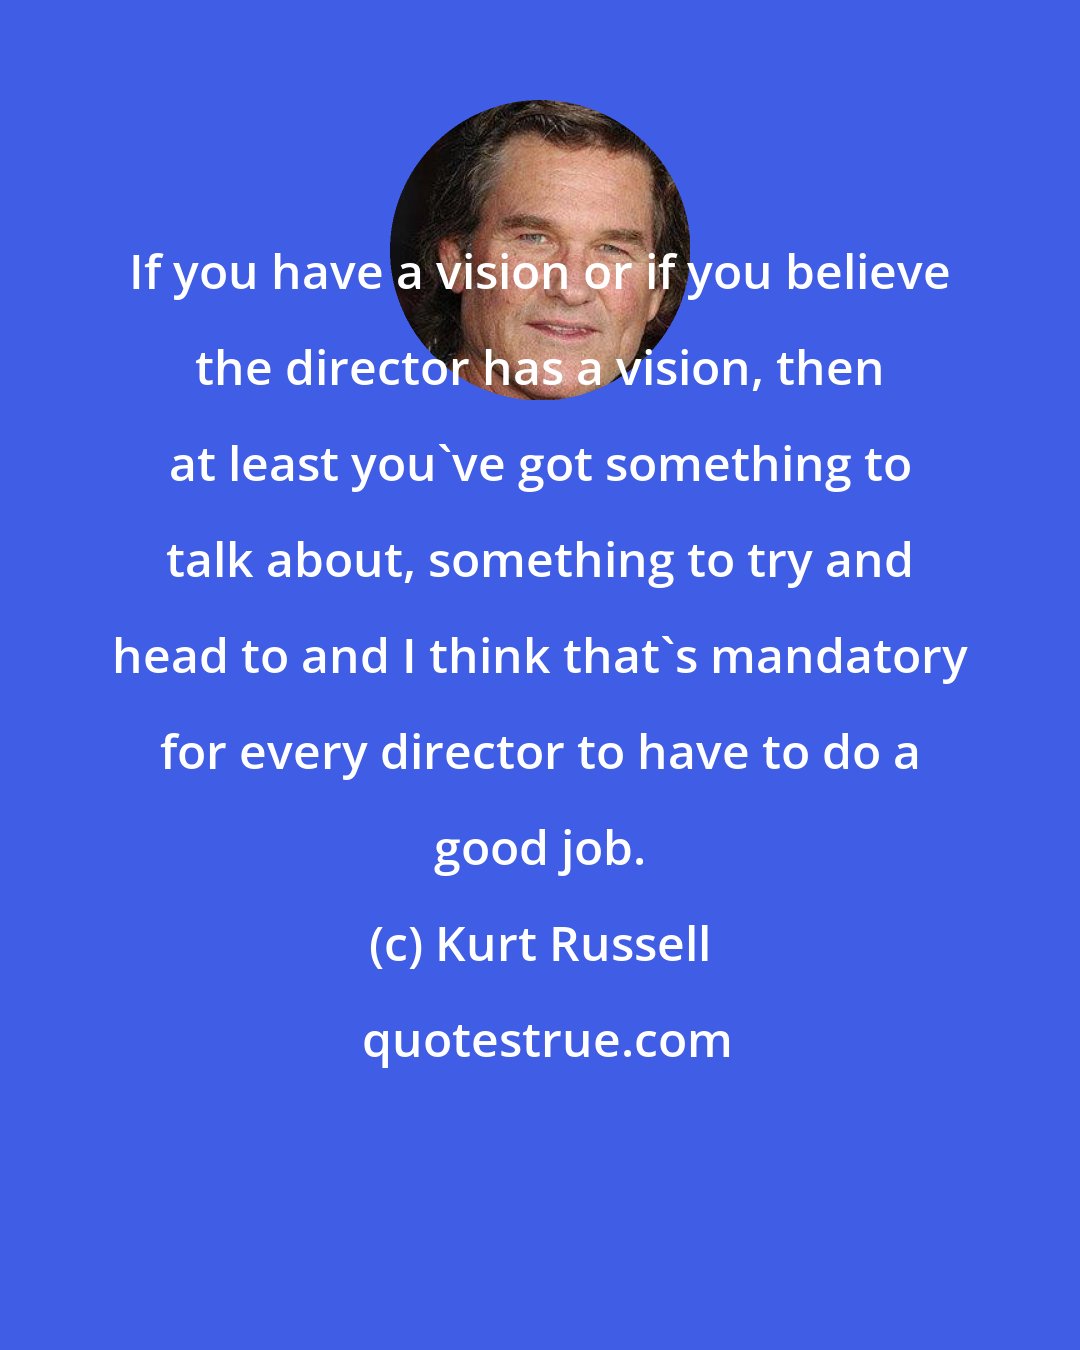 Kurt Russell: If you have a vision or if you believe the director has a vision, then at least you've got something to talk about, something to try and head to and I think that's mandatory for every director to have to do a good job.